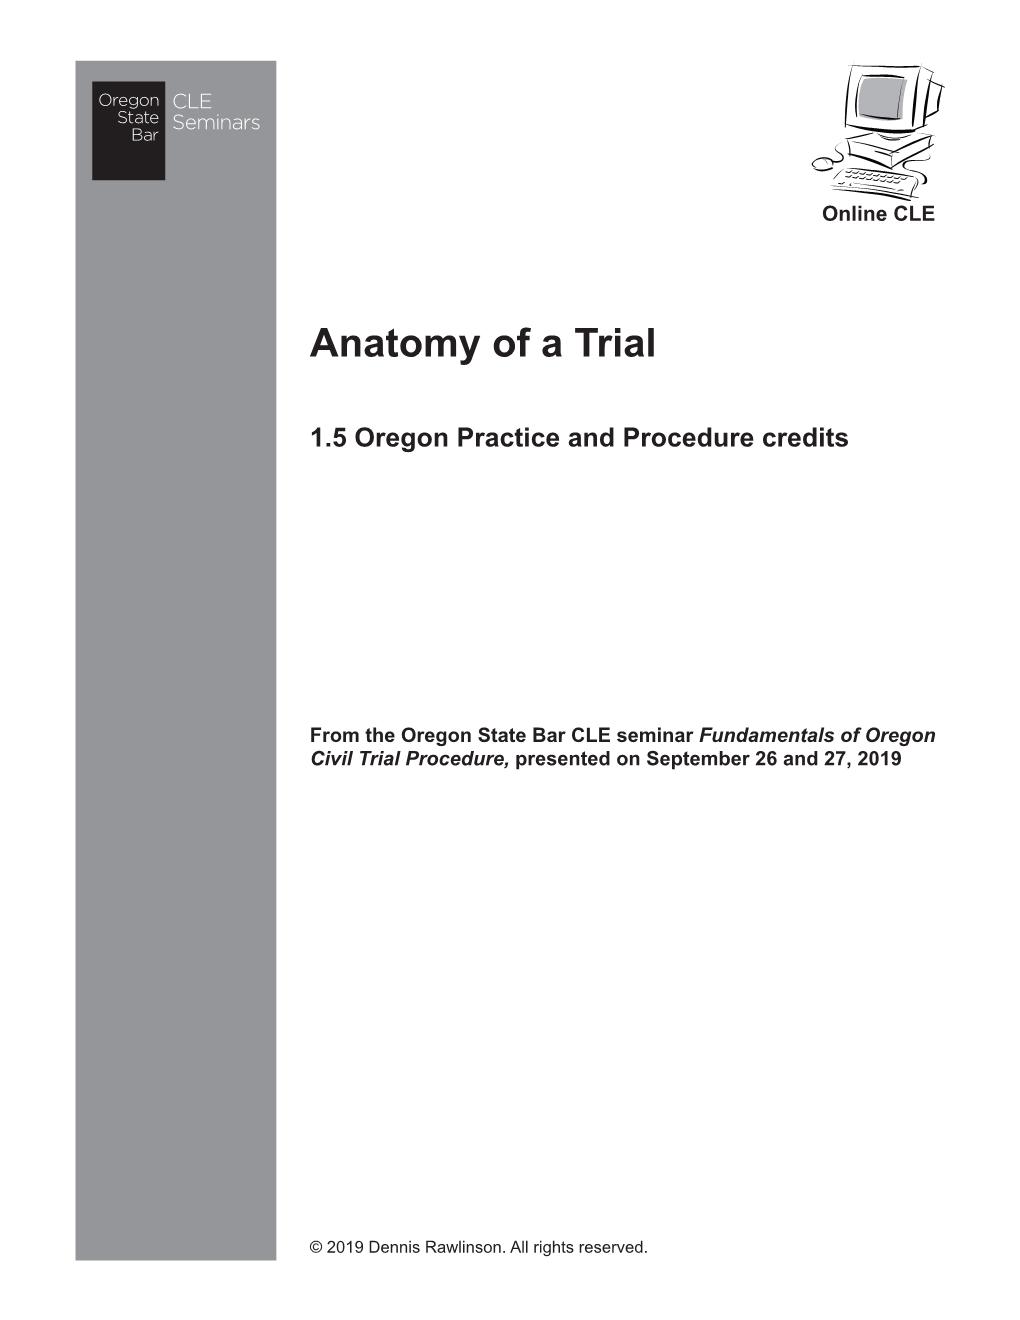 Anatomy of a Trial